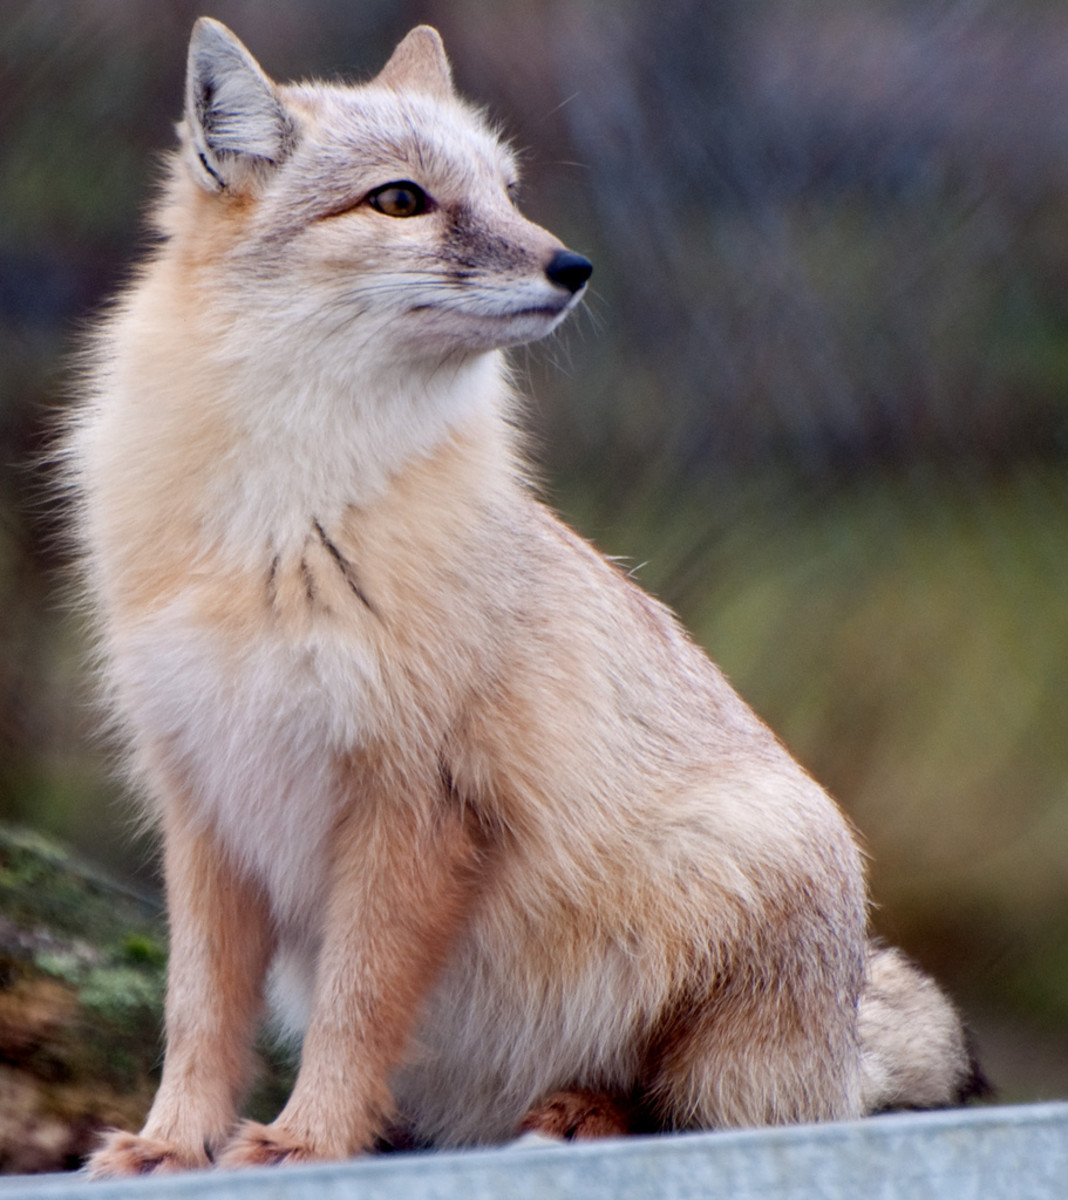 Though some owners find relative success litter training their foxes, it's important to remember that even trained foxes still occasionally urinate to mark their territory—and the smell is extremely pungent and difficult to remove.